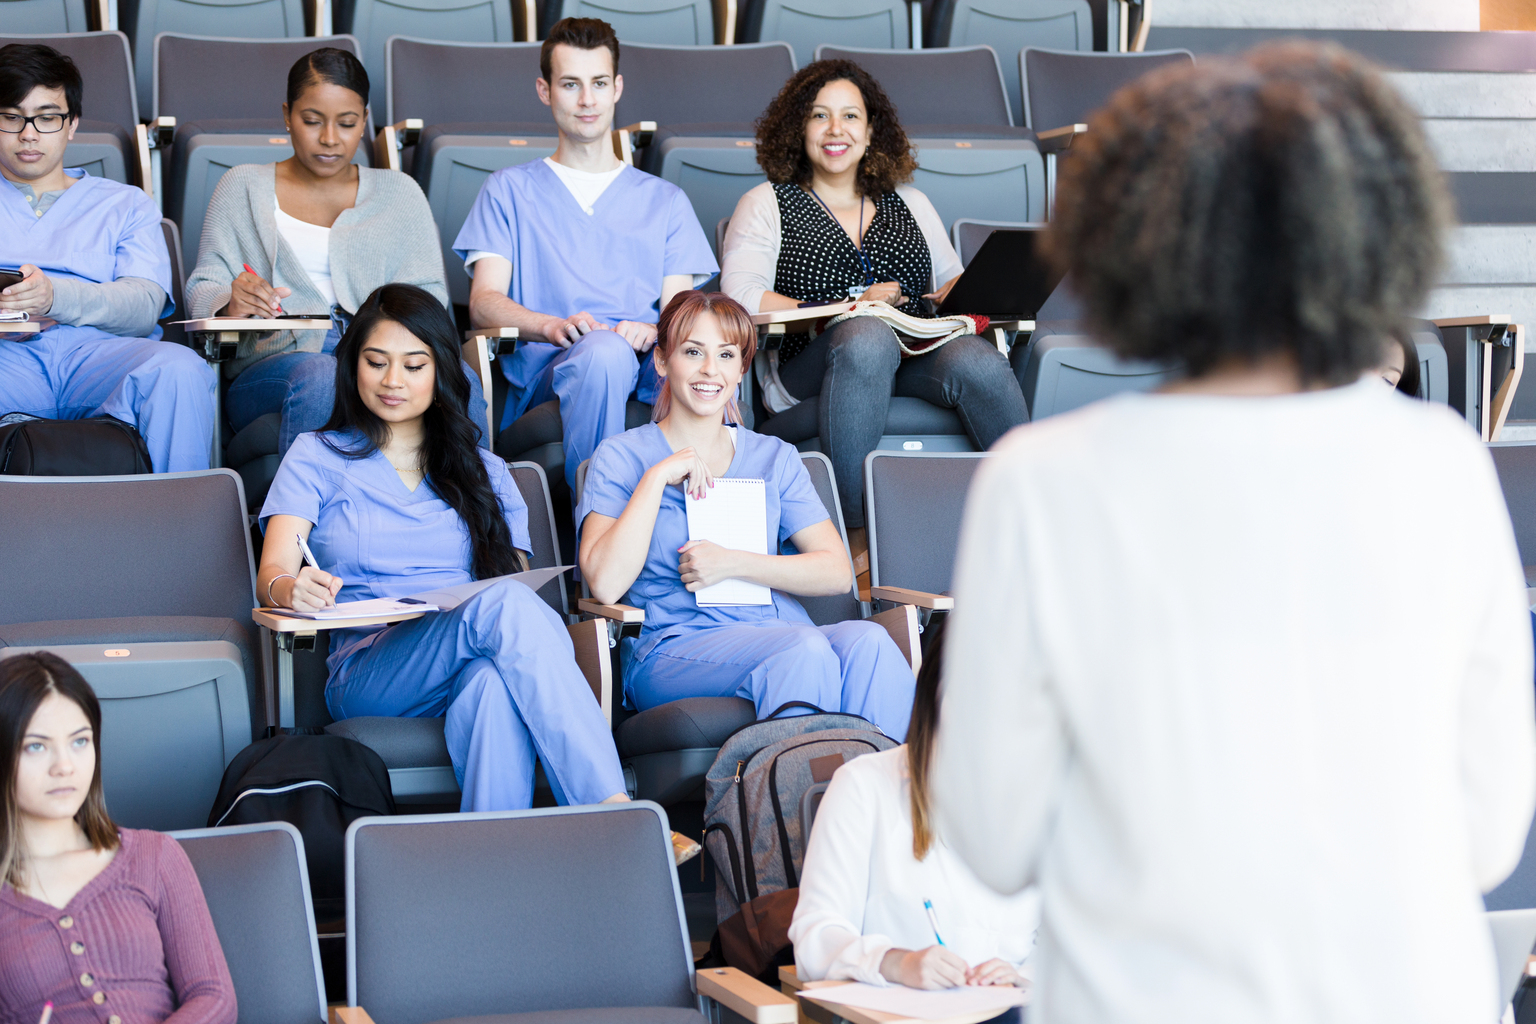 Don't go it alone: Mentoring in medical education